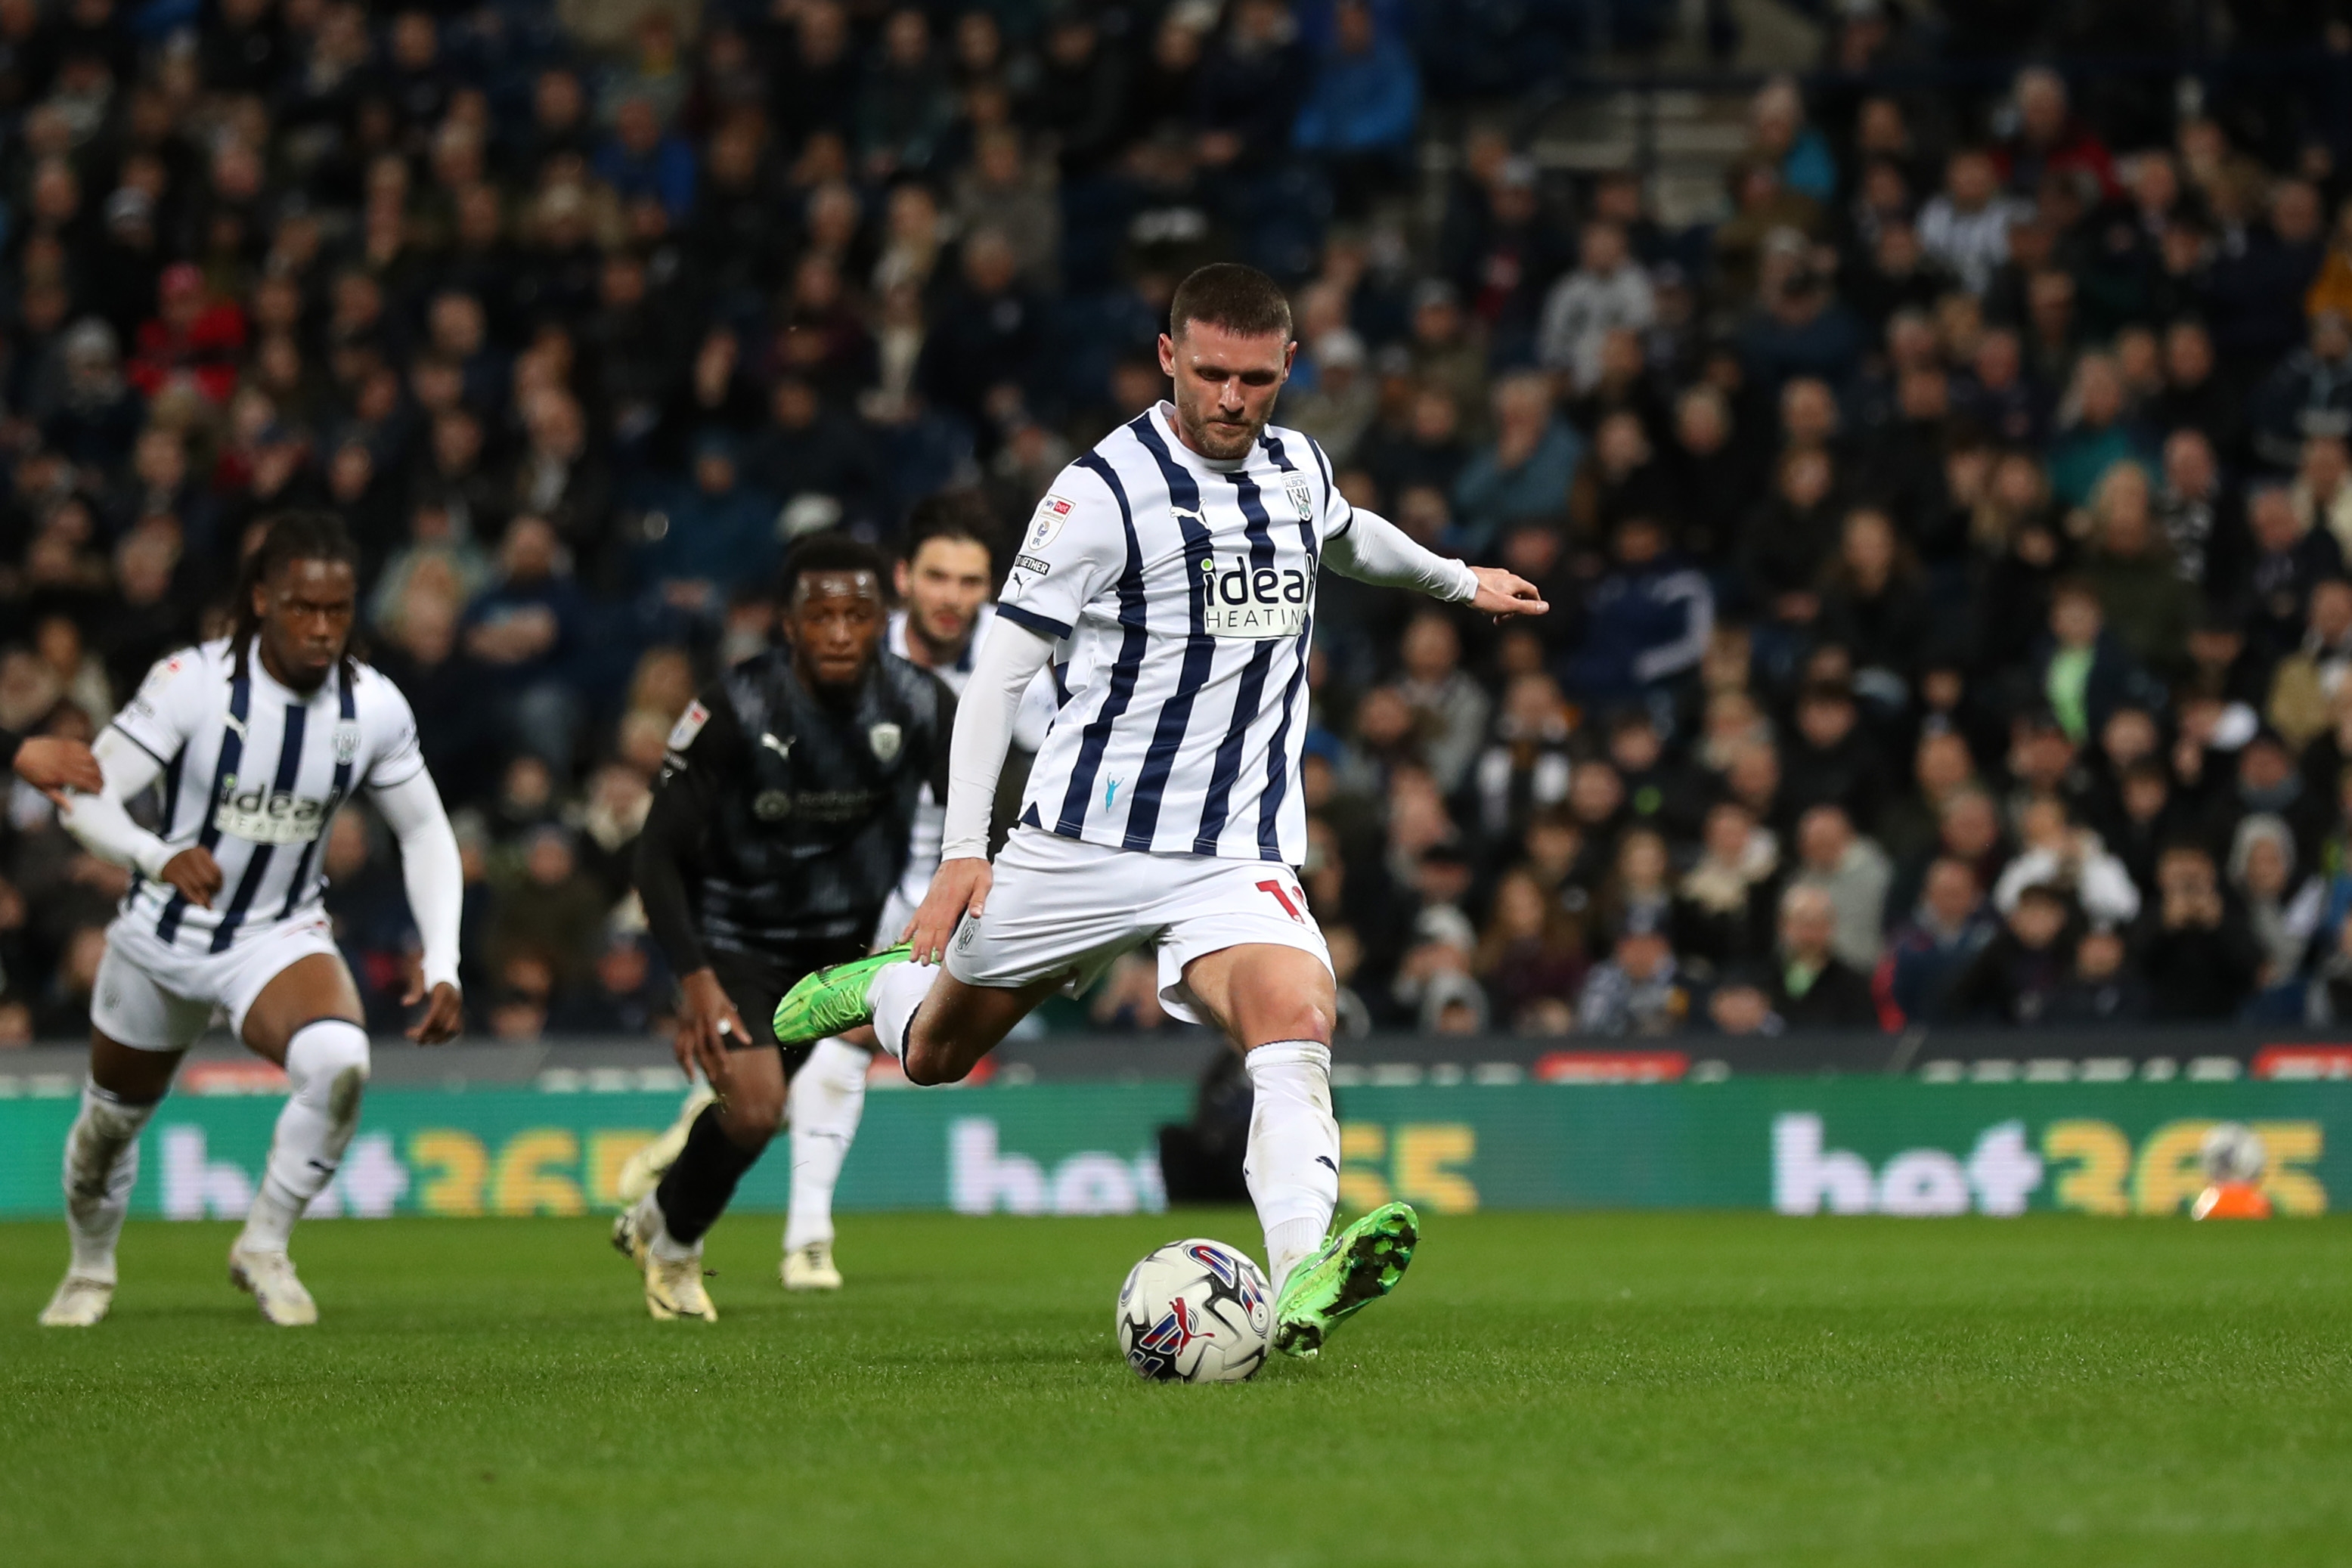 John Swift takes a penalty against Rotherham at The Hawthorns